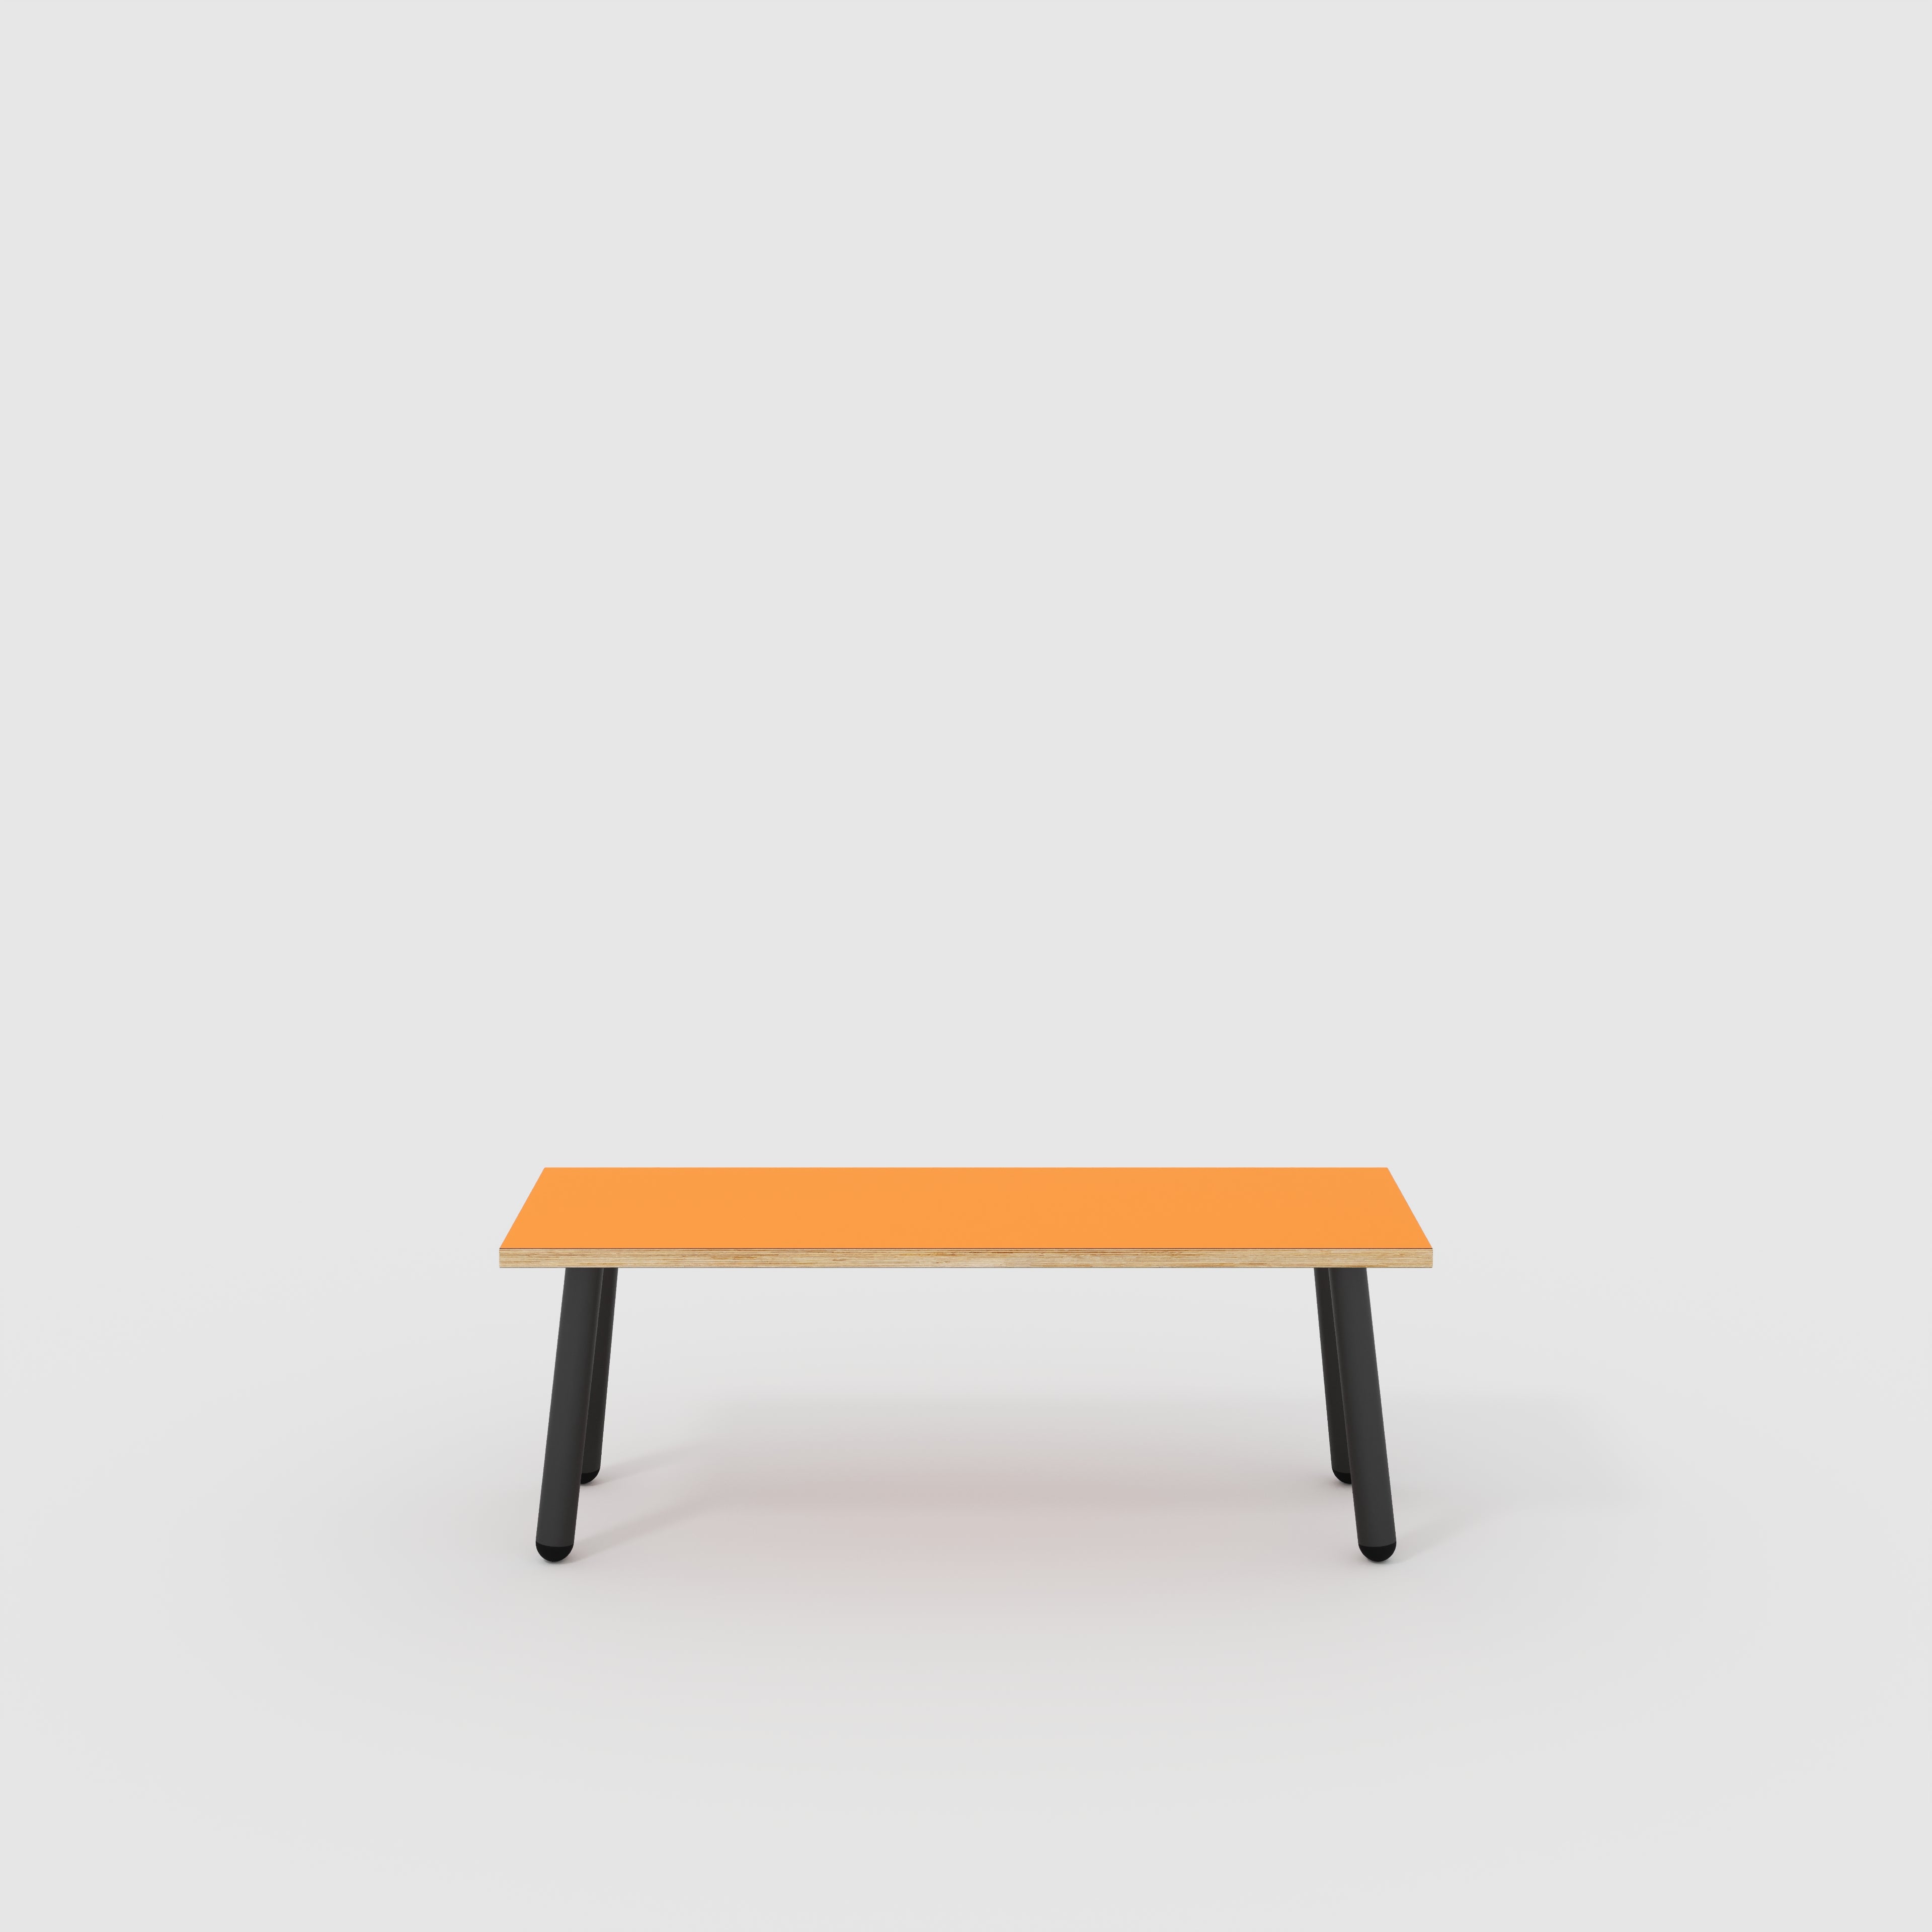 Bench Seat with Black Round Single Pin Legs - Formica Levante Orange - 1200(w) x 400(d)